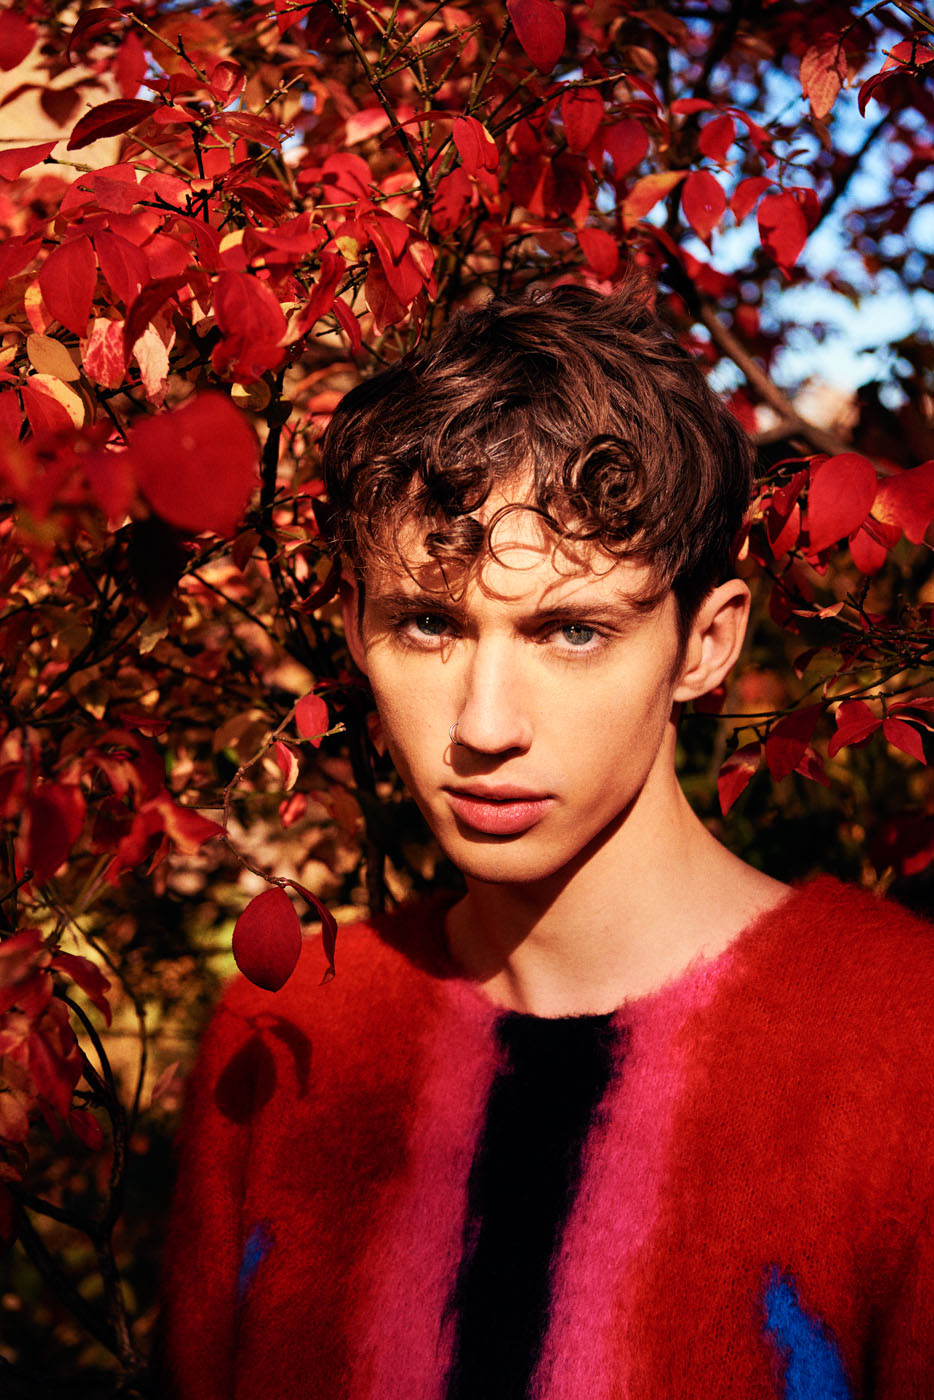  Troye Sivan, Teen Vogue, Volume 1: The Love Issue, February 13, 2017. 